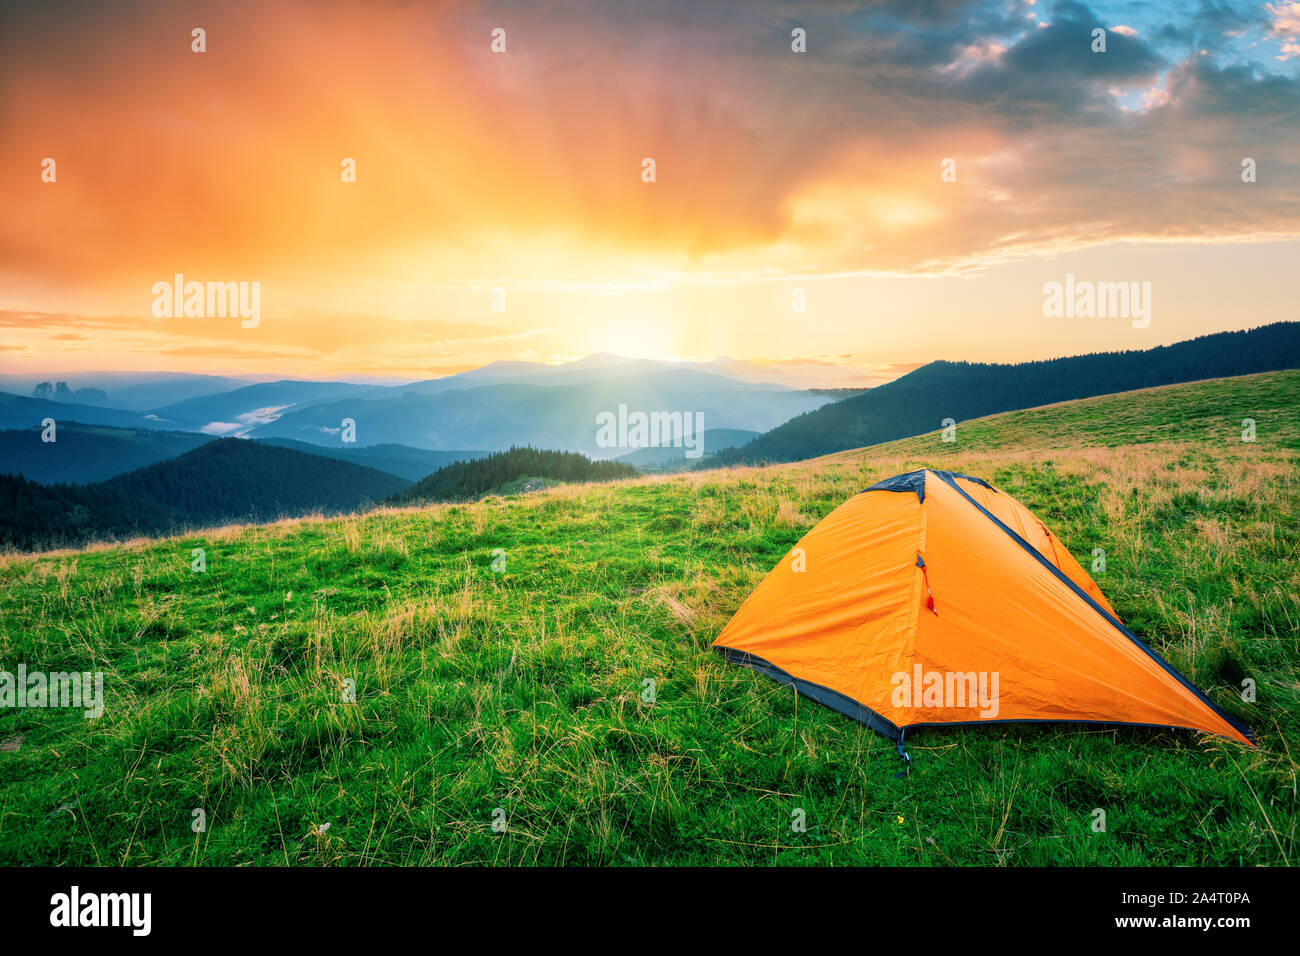 Orange tent in the mountains at sunset Stock Photo